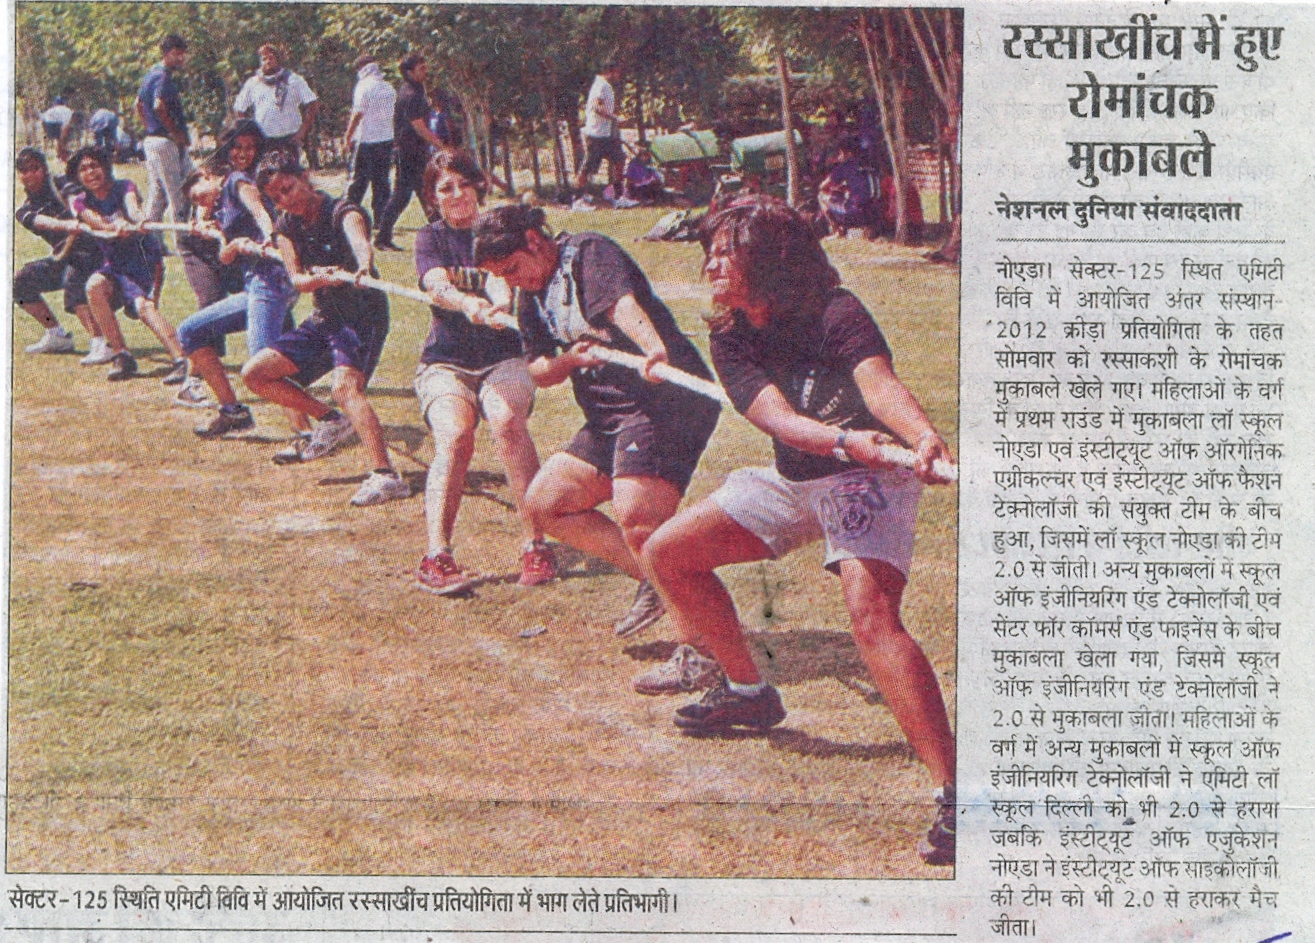 Matches of Tug of War held during Sangathan